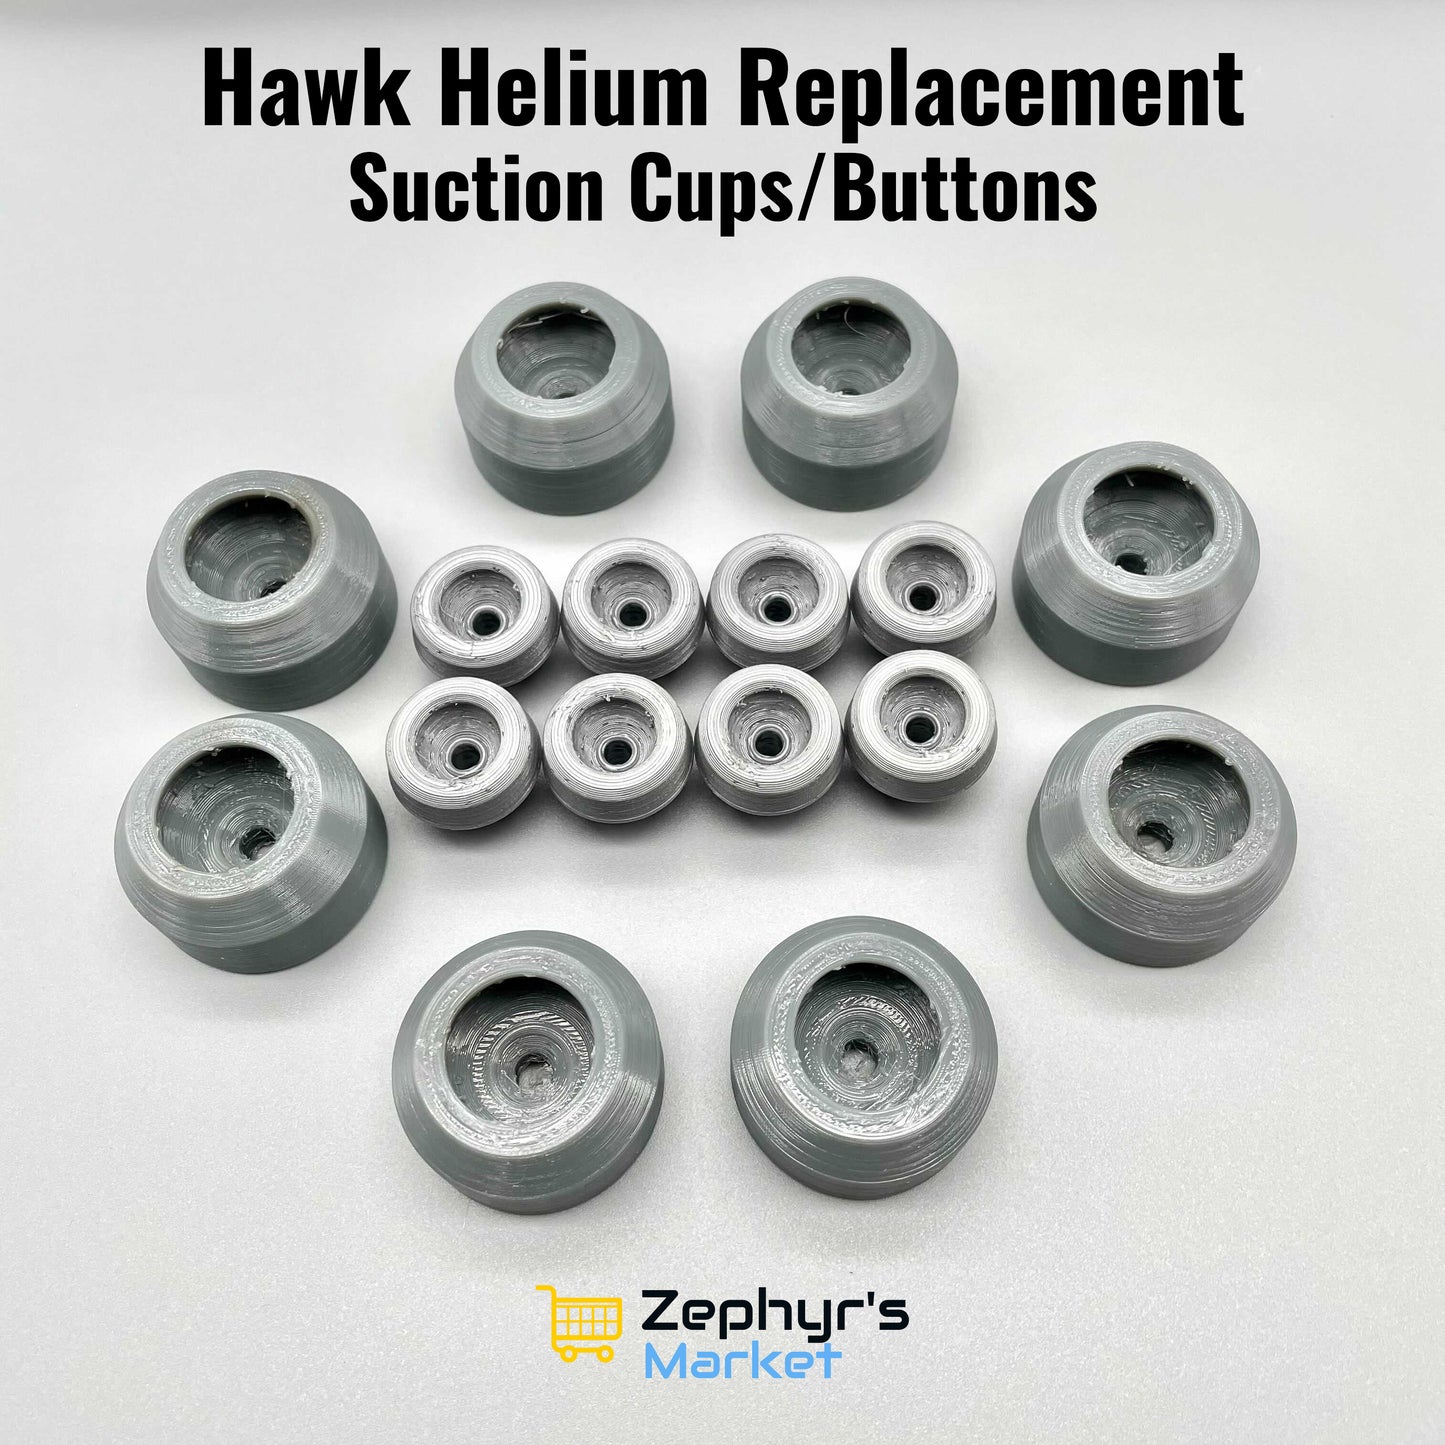 Hawk Helium Buttons & Suction Cups (8 Pack) - Very Durable!